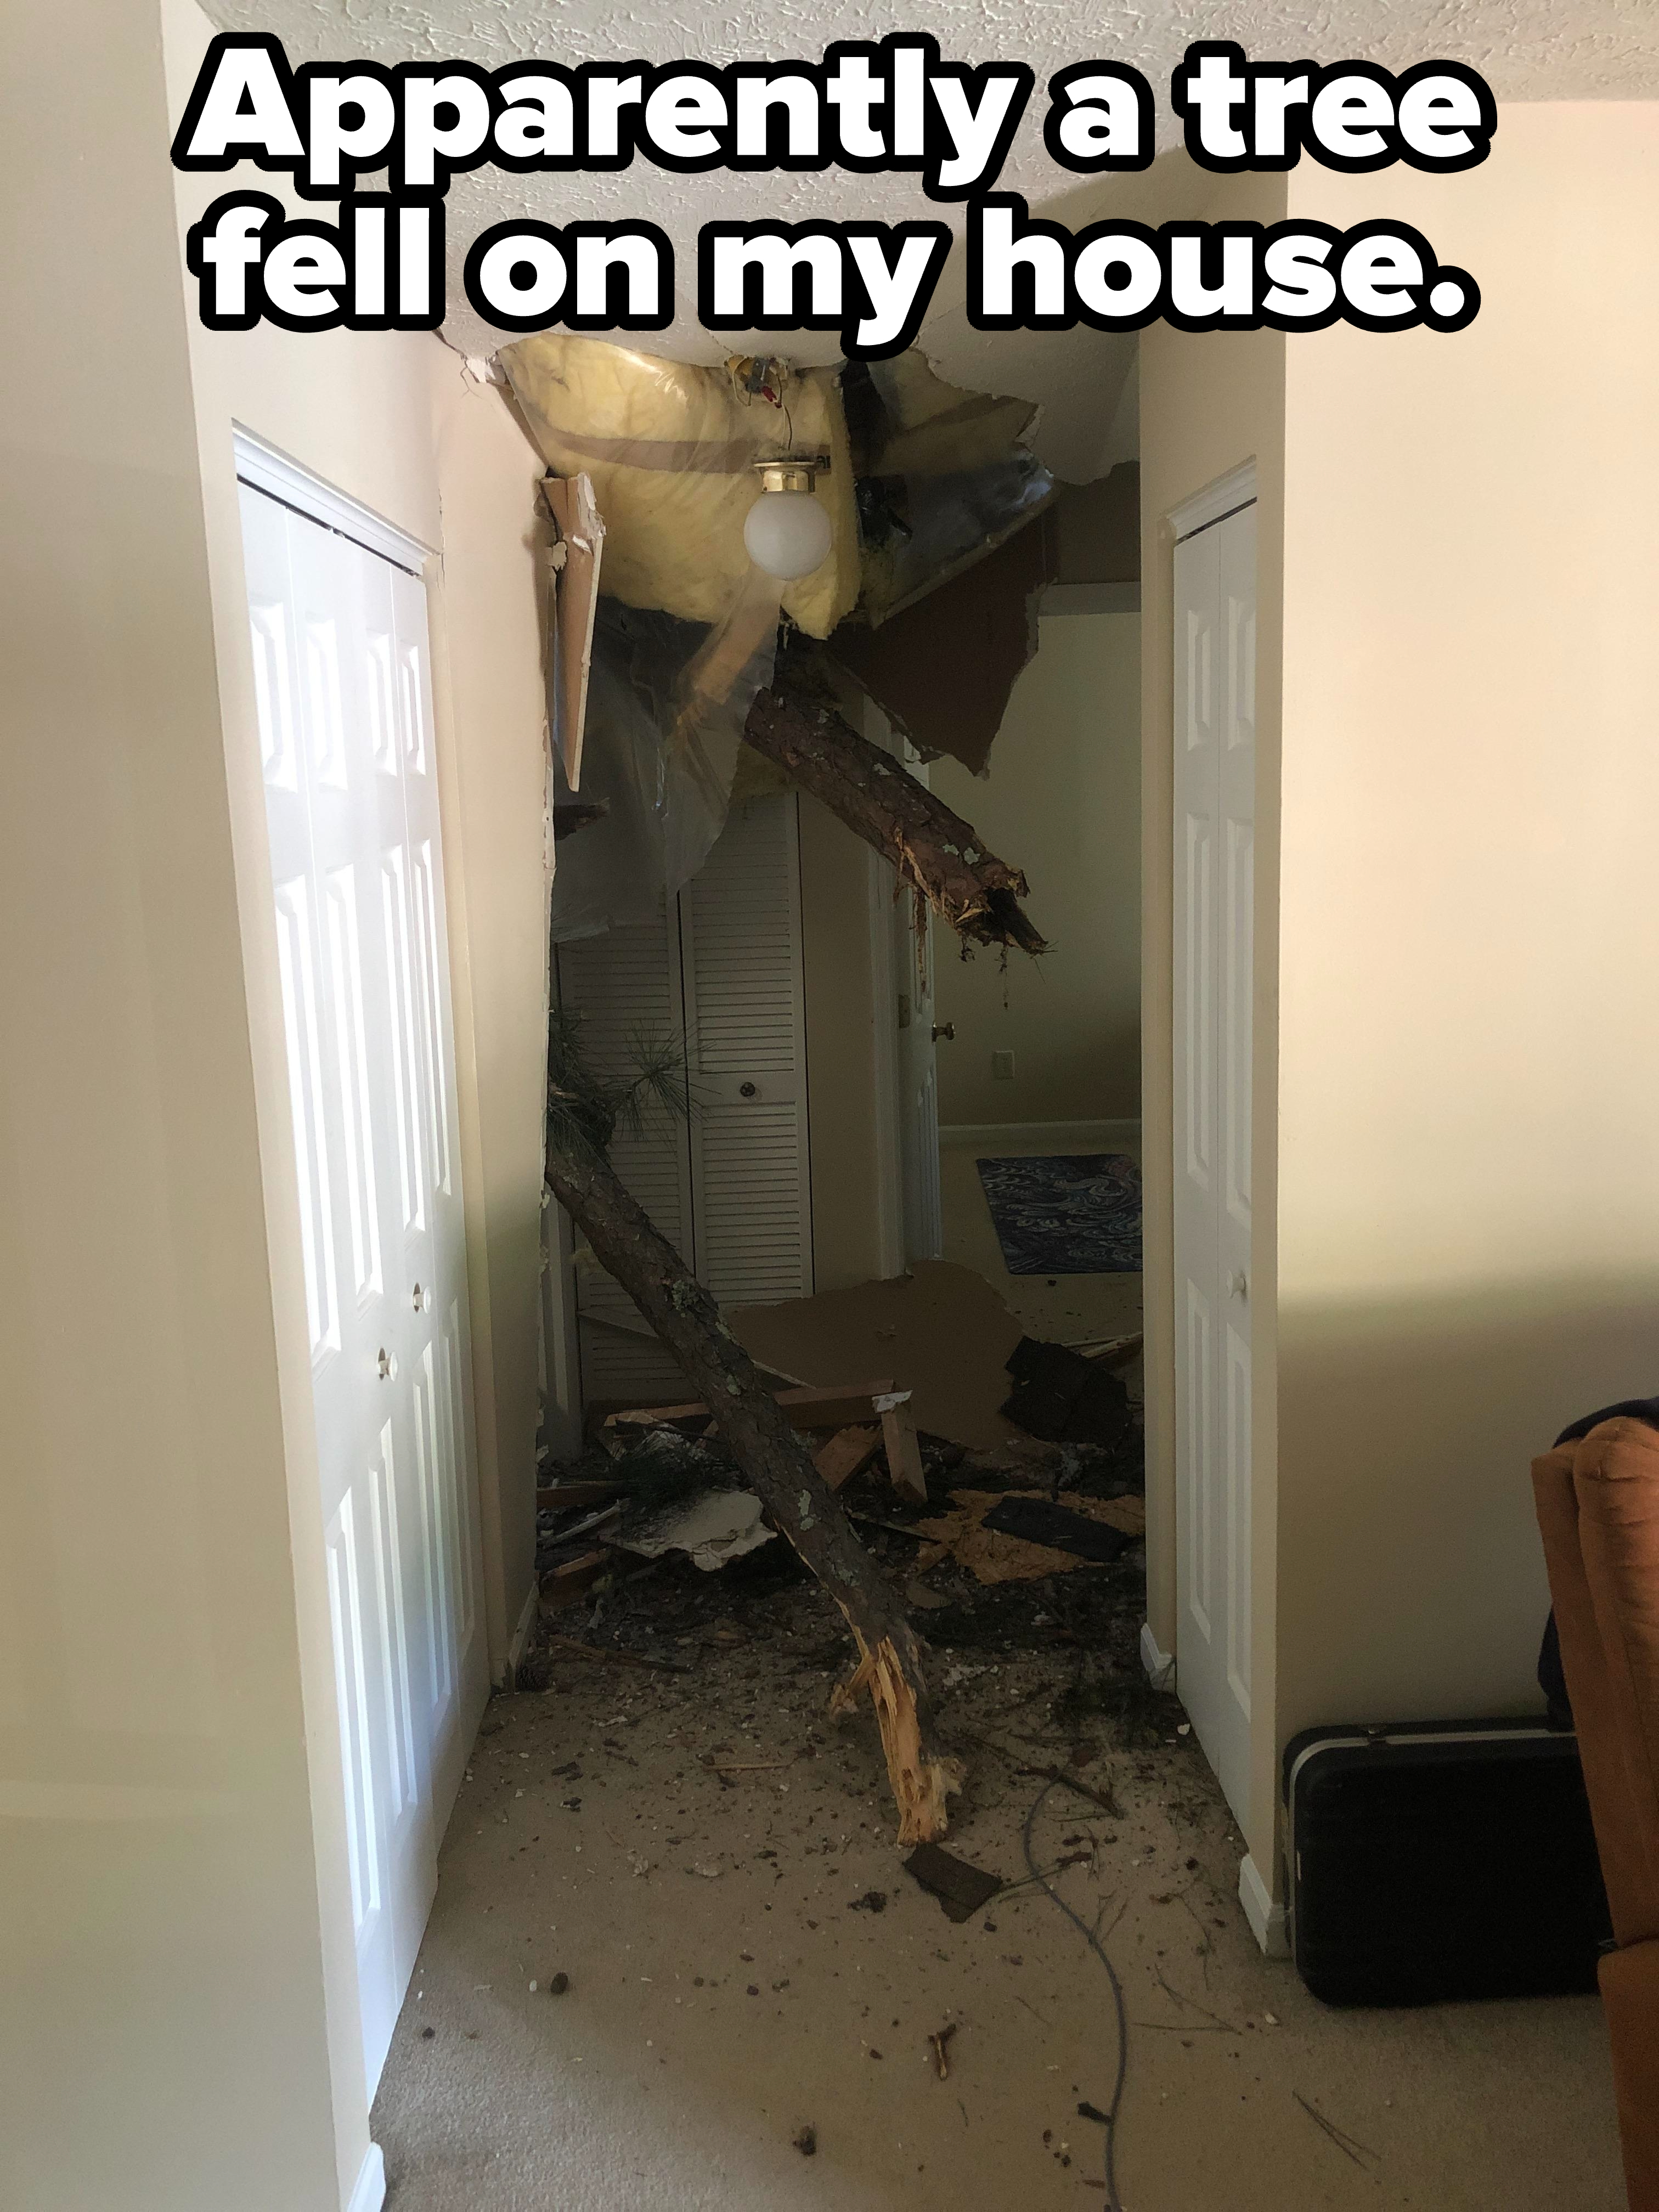 The view of a house&#x27;s hallway with a huge hole in the ceiling and tree bark, branches, and dirt on the floor, with caption &quot;Apparently a tree fell on my house&quot;